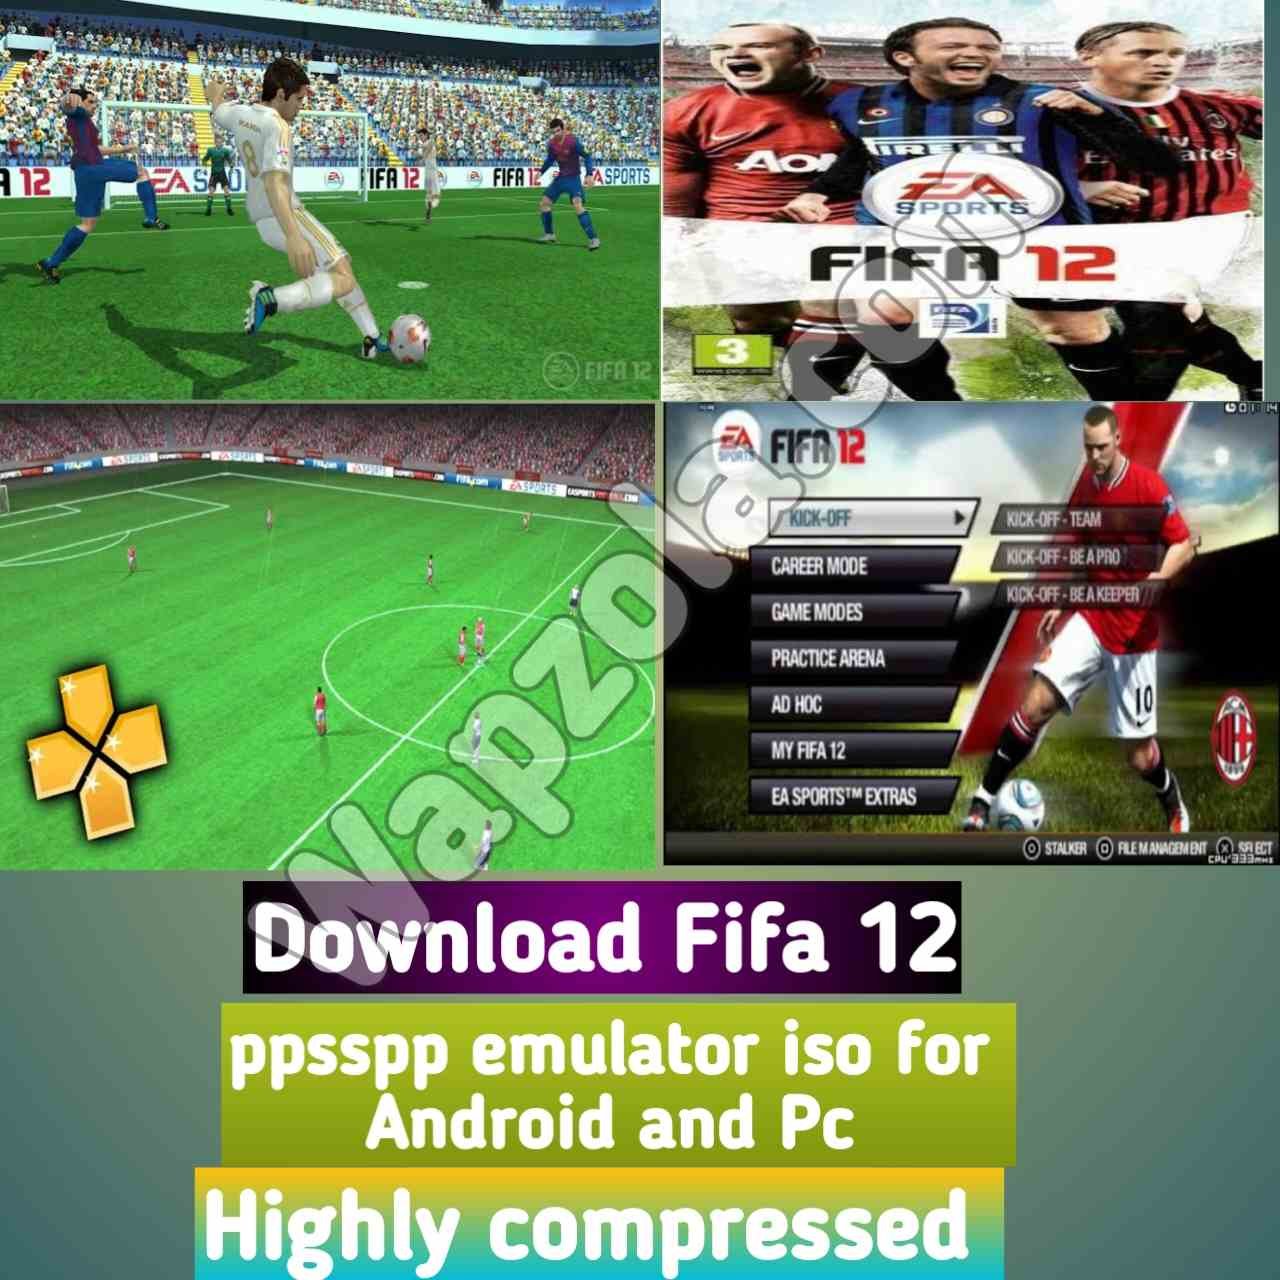 Read more about the article [Download] FIFA 12 ppsspp emulator – PSP APK Iso highly compressed 20MB